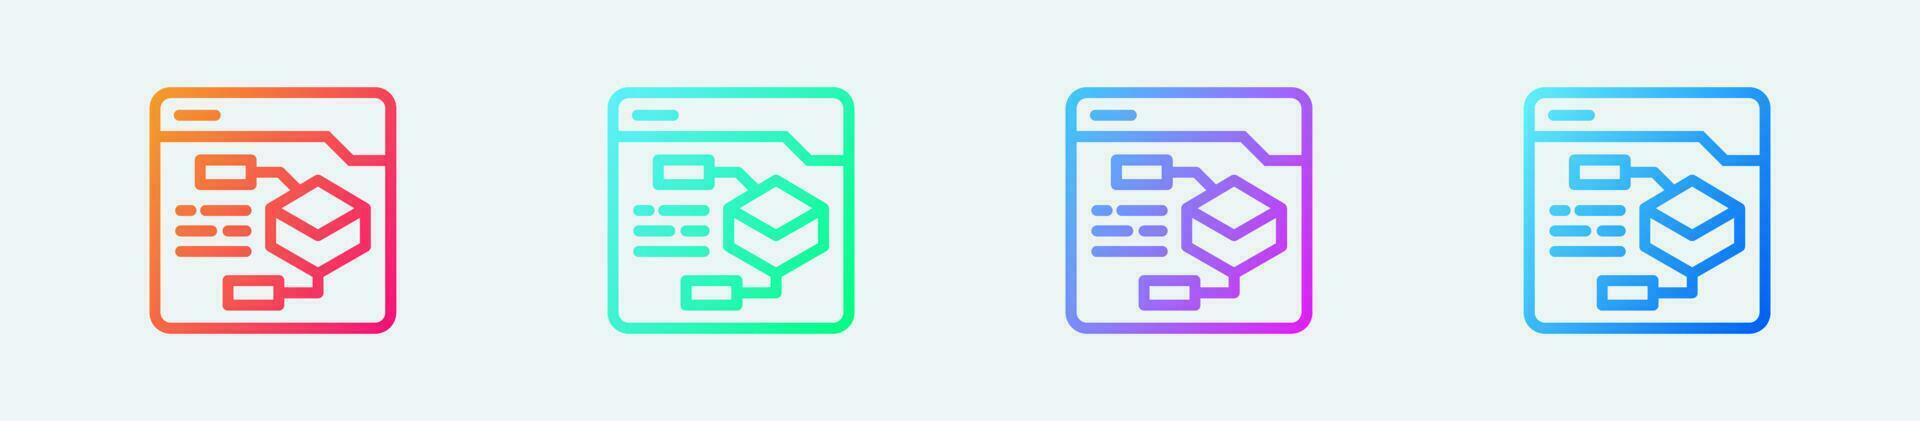 Algorithm line icon in gradient colors. Programming signs vector illustration.